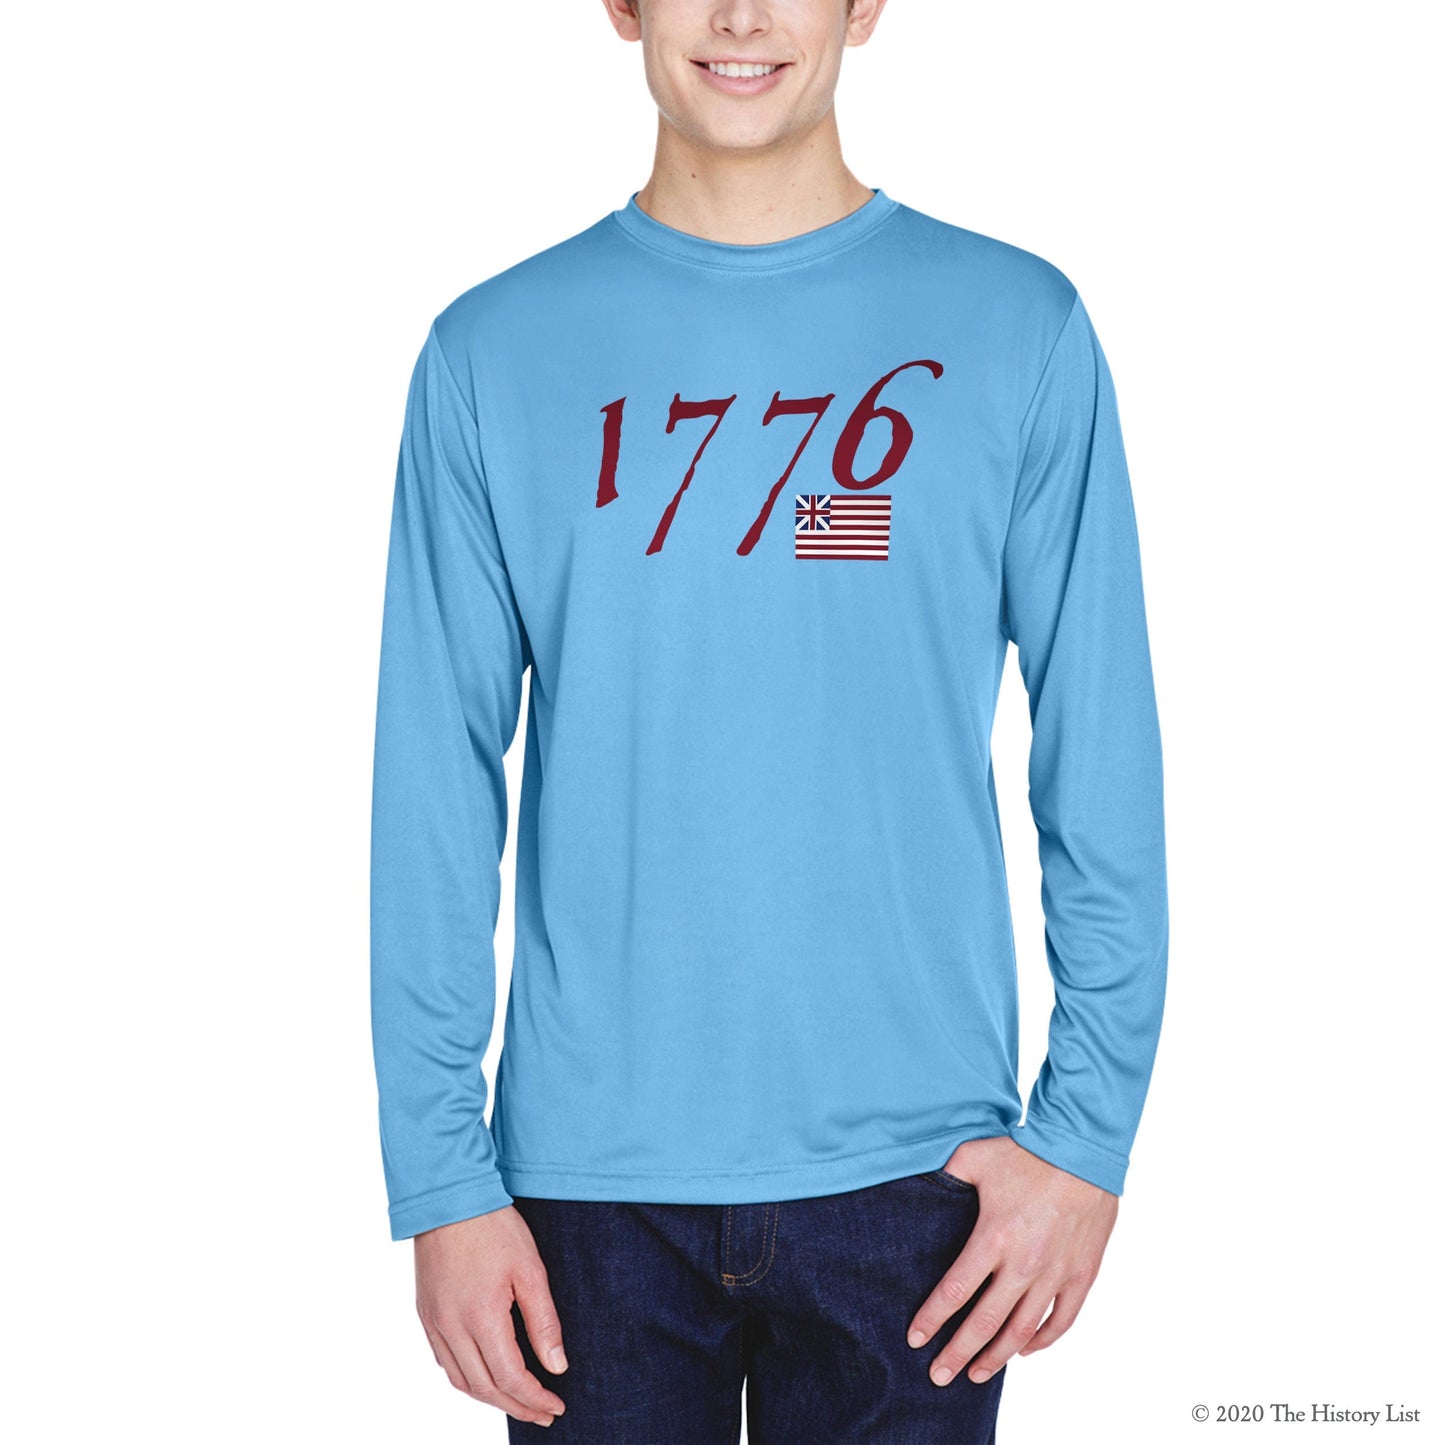 "We hold these truths - July 4, 1776” on moisture-wicking 100% polyester interlock with SPF 40+ UV protection - Long-sleeved for men from The History List store